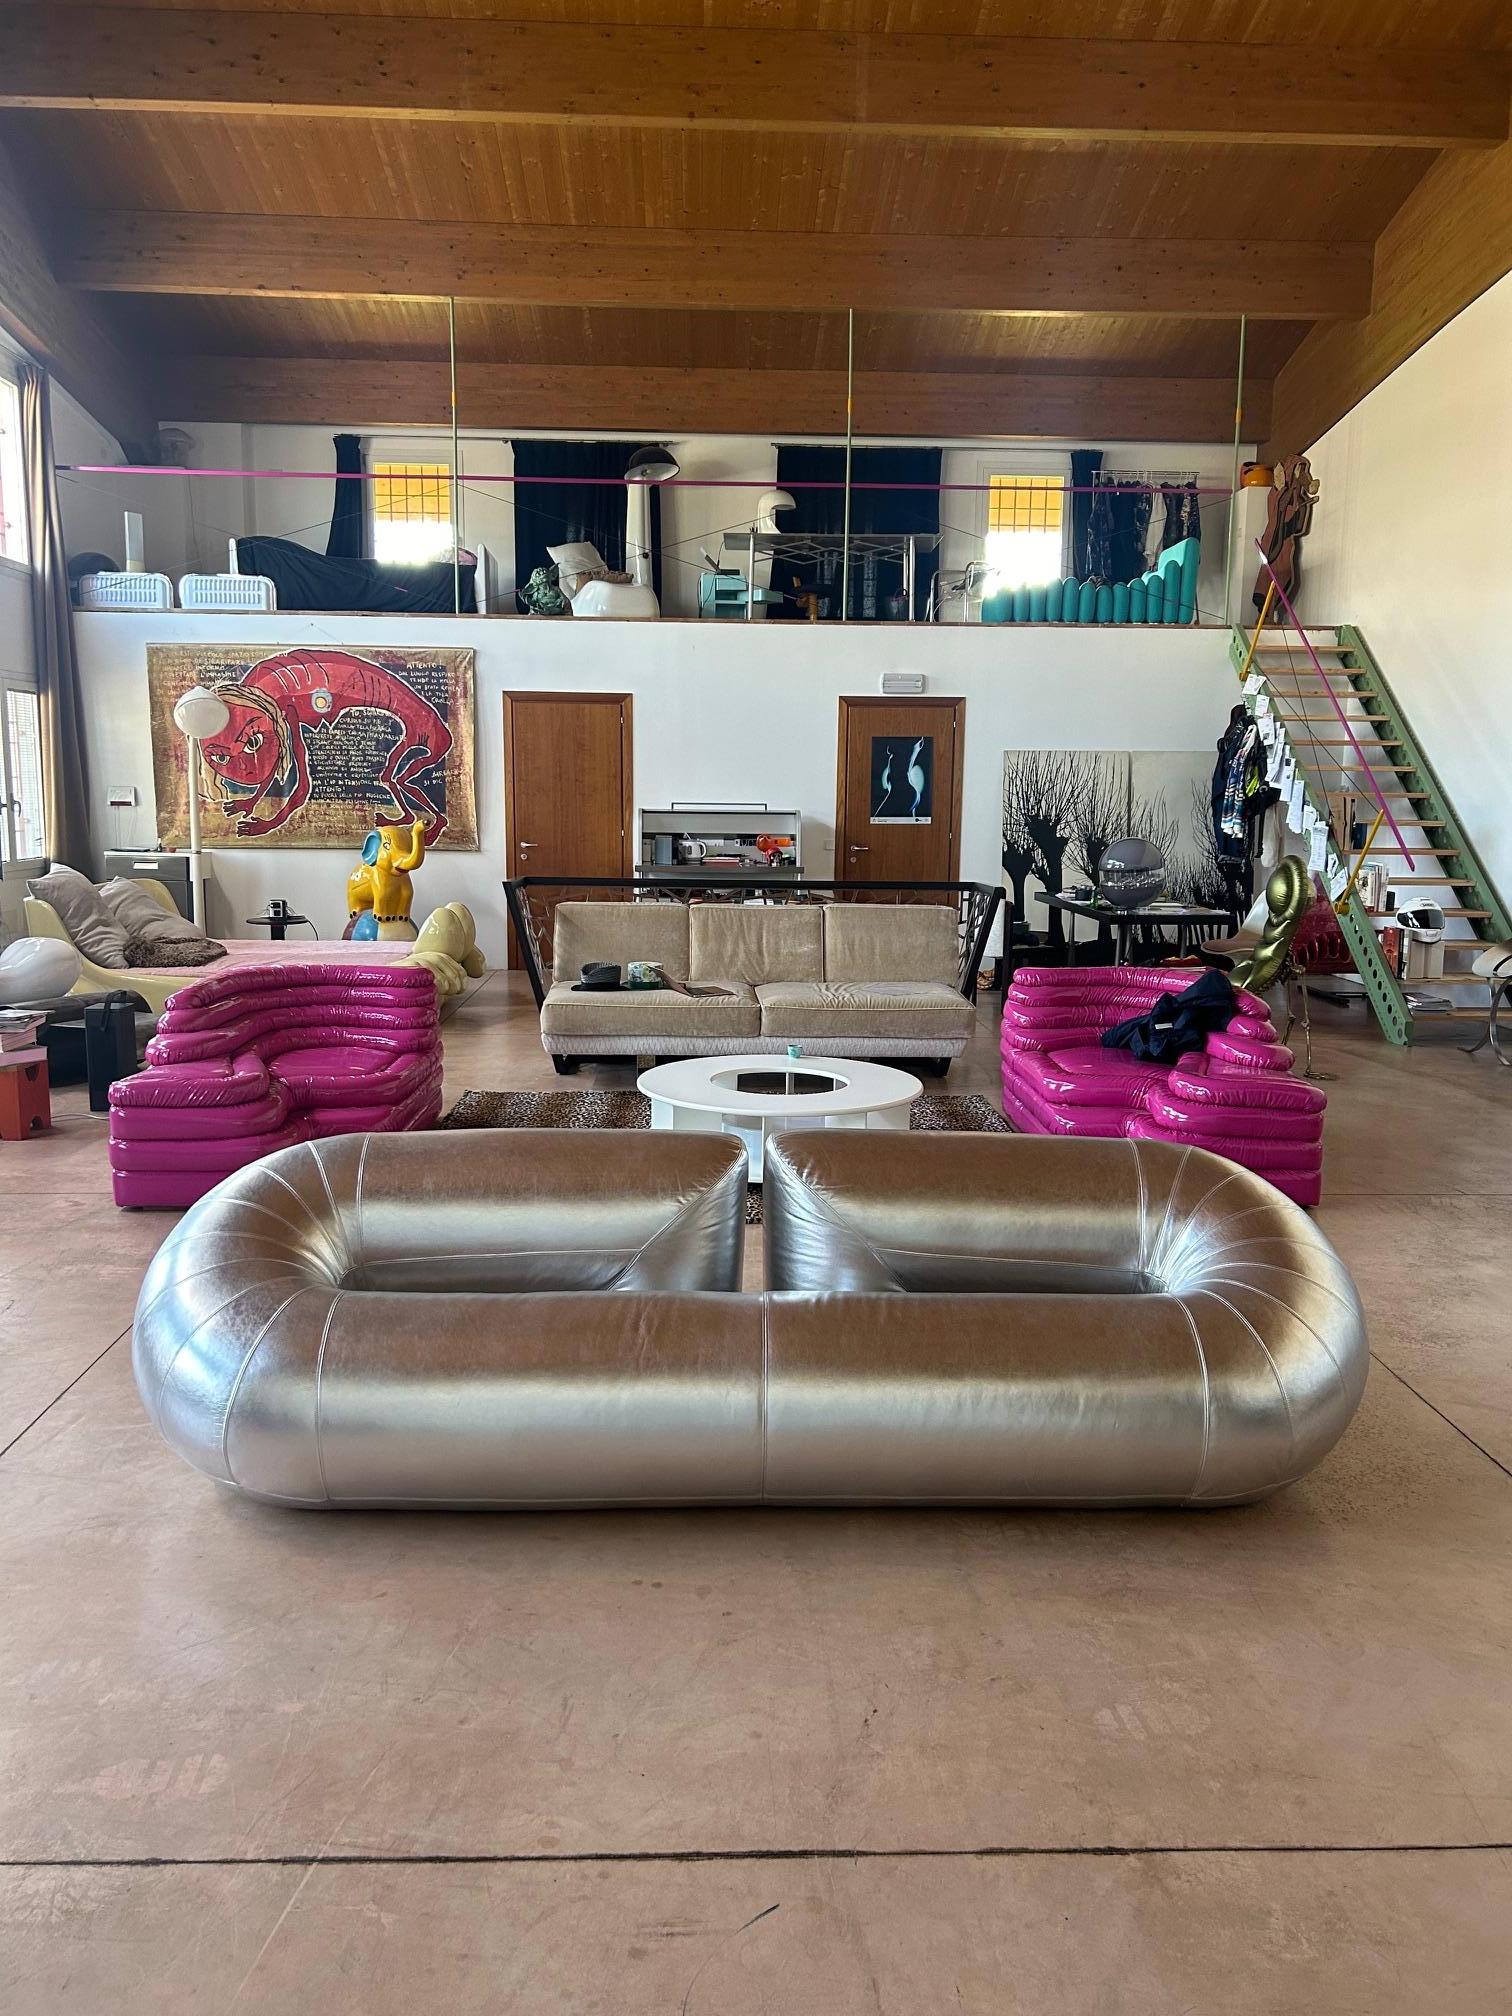 Rare Zeppelin sofa designed by Walter Leeman in the seventies for Velda and produced in 20 copies. The sofa, thanks to its monumental dimensions and seamless tubular structure, makes it sculptural and predominant in any environment. The sage green